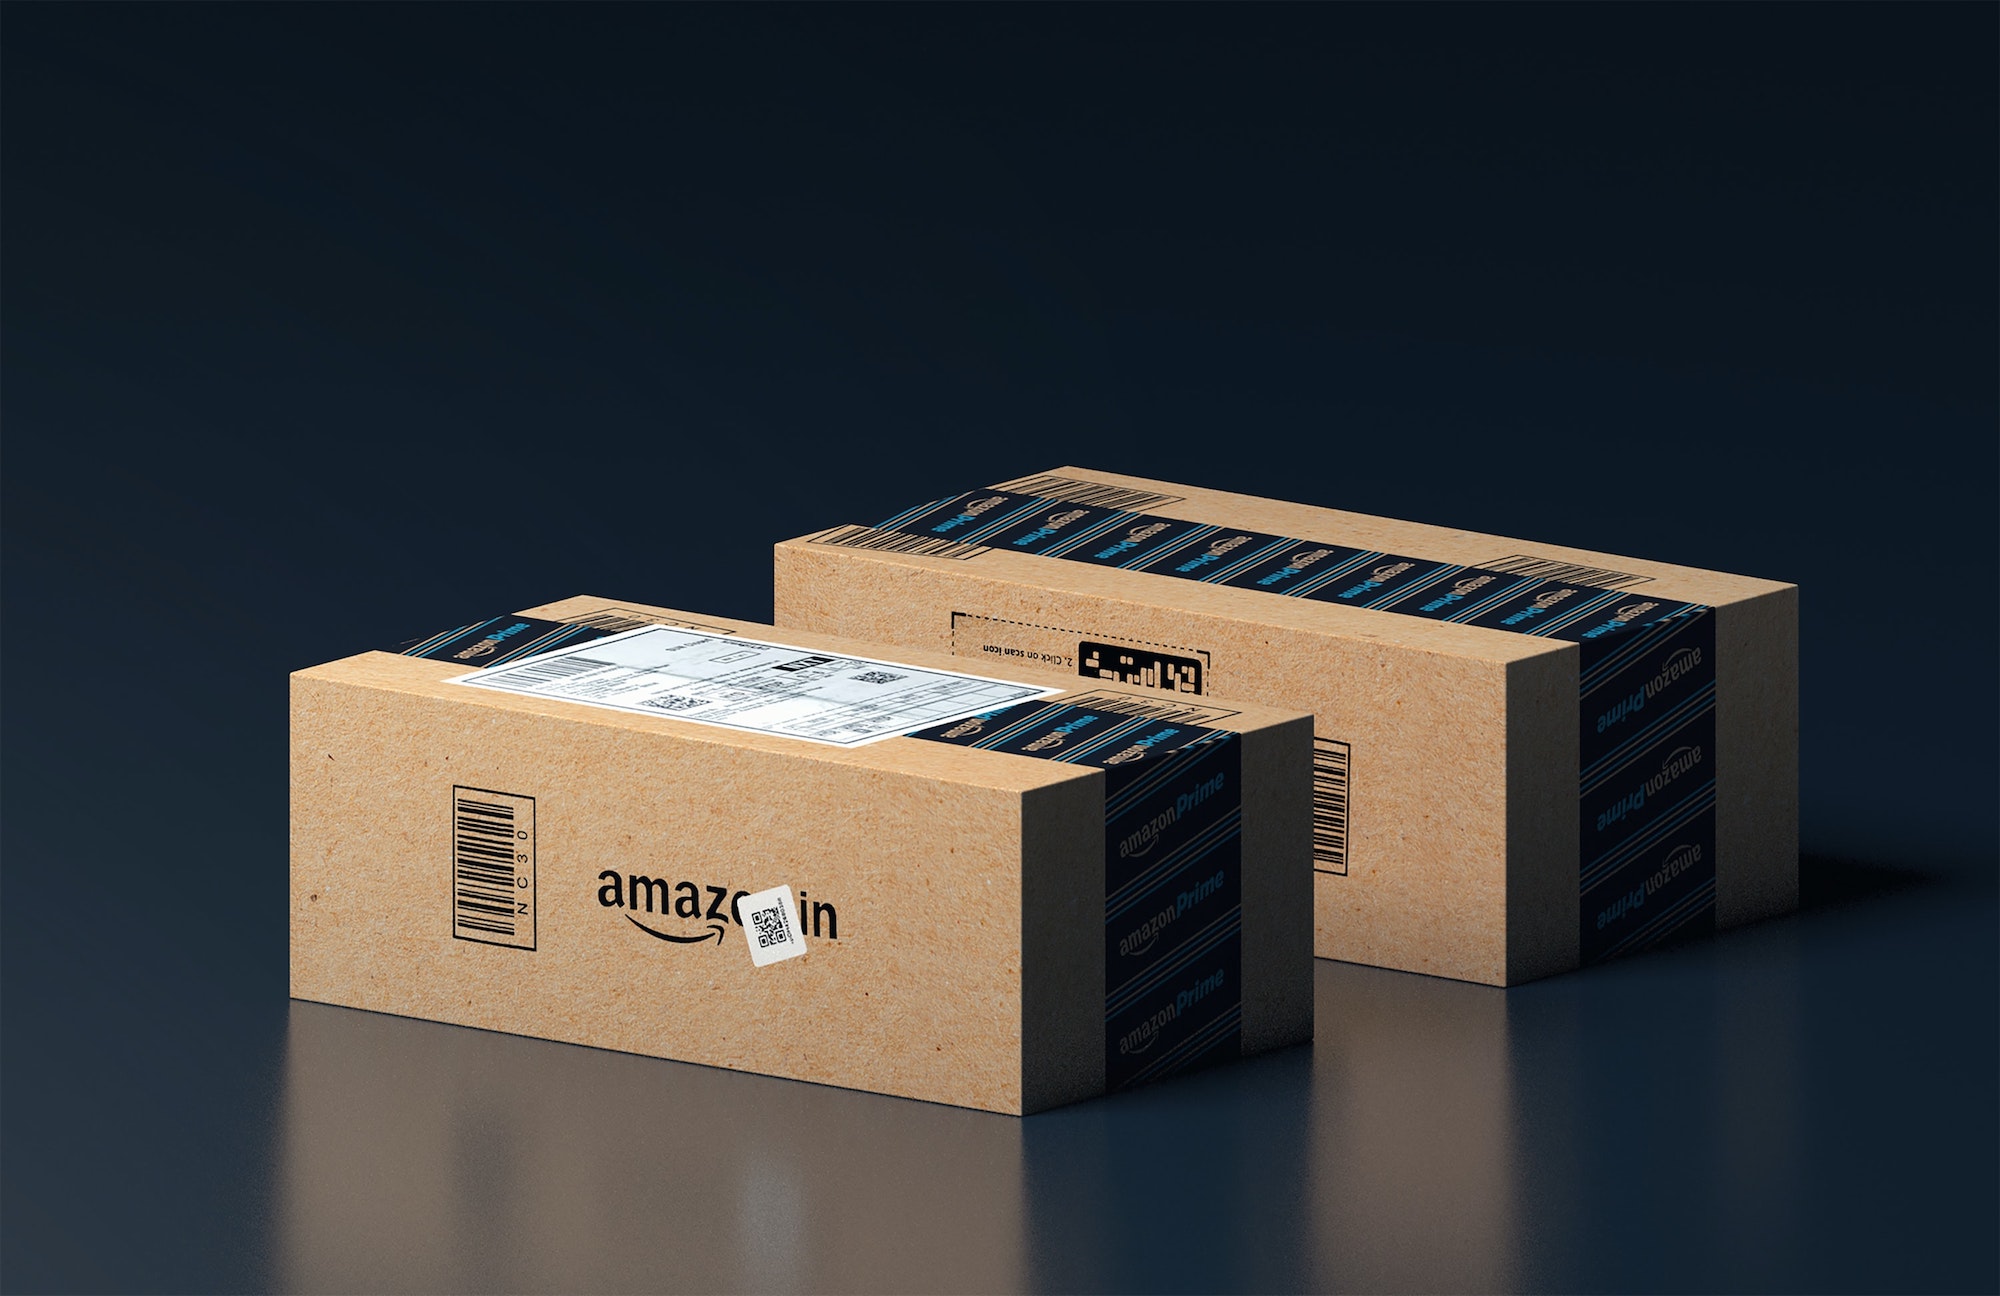 US: Federal Trade Commission sues Amazon over monopoly allegations